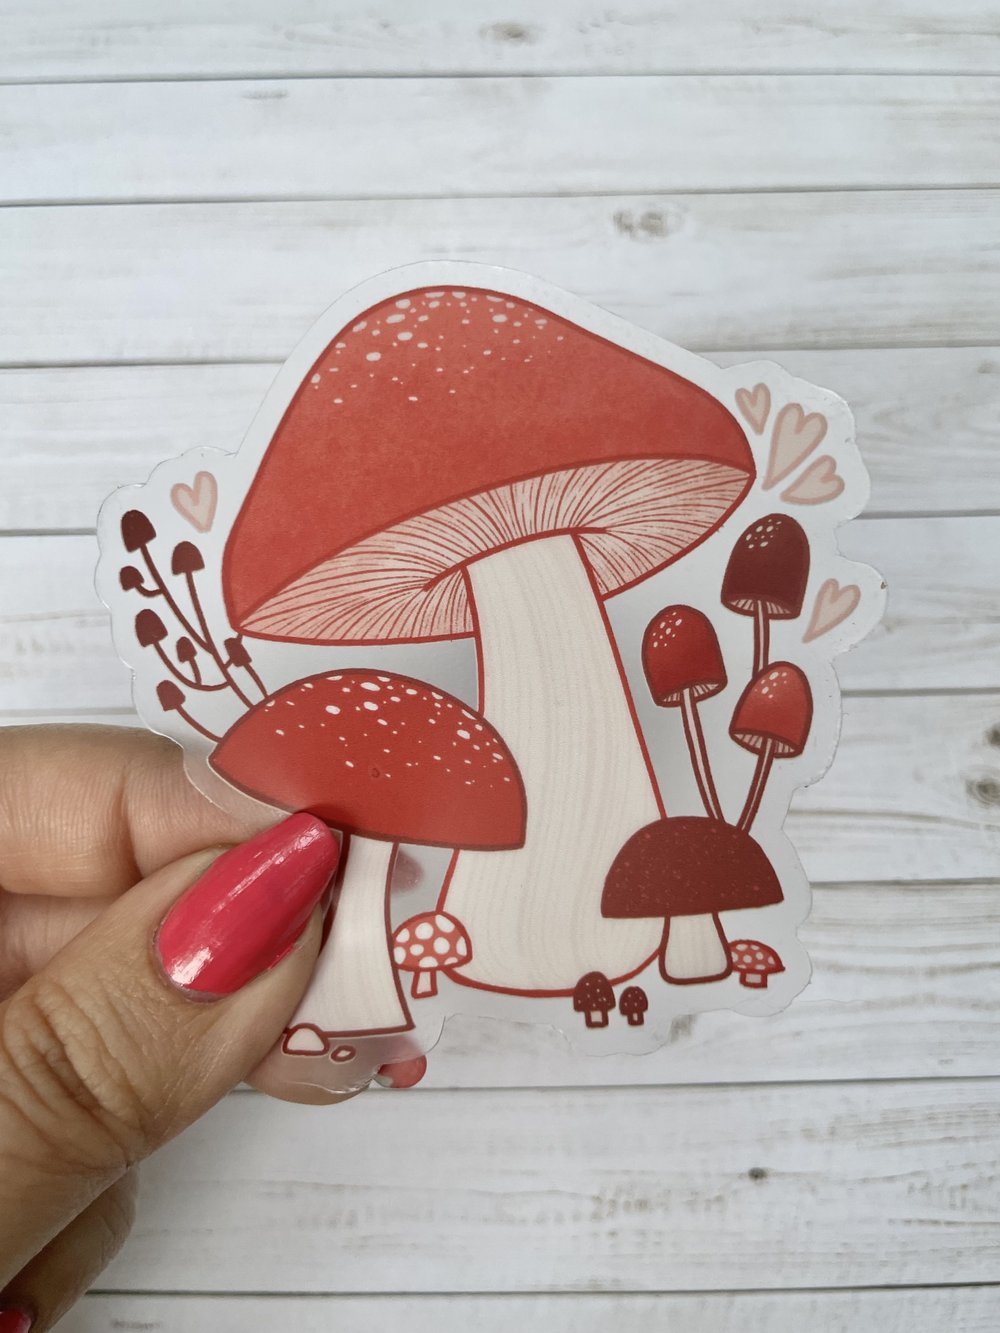 HINZIC 200pcs Red Strawberry Stickers, Self Adhesive Mushroom Sticker  Botanical Stickers Transparent Flower Stickers for Scrapbooking Vintage  Plant